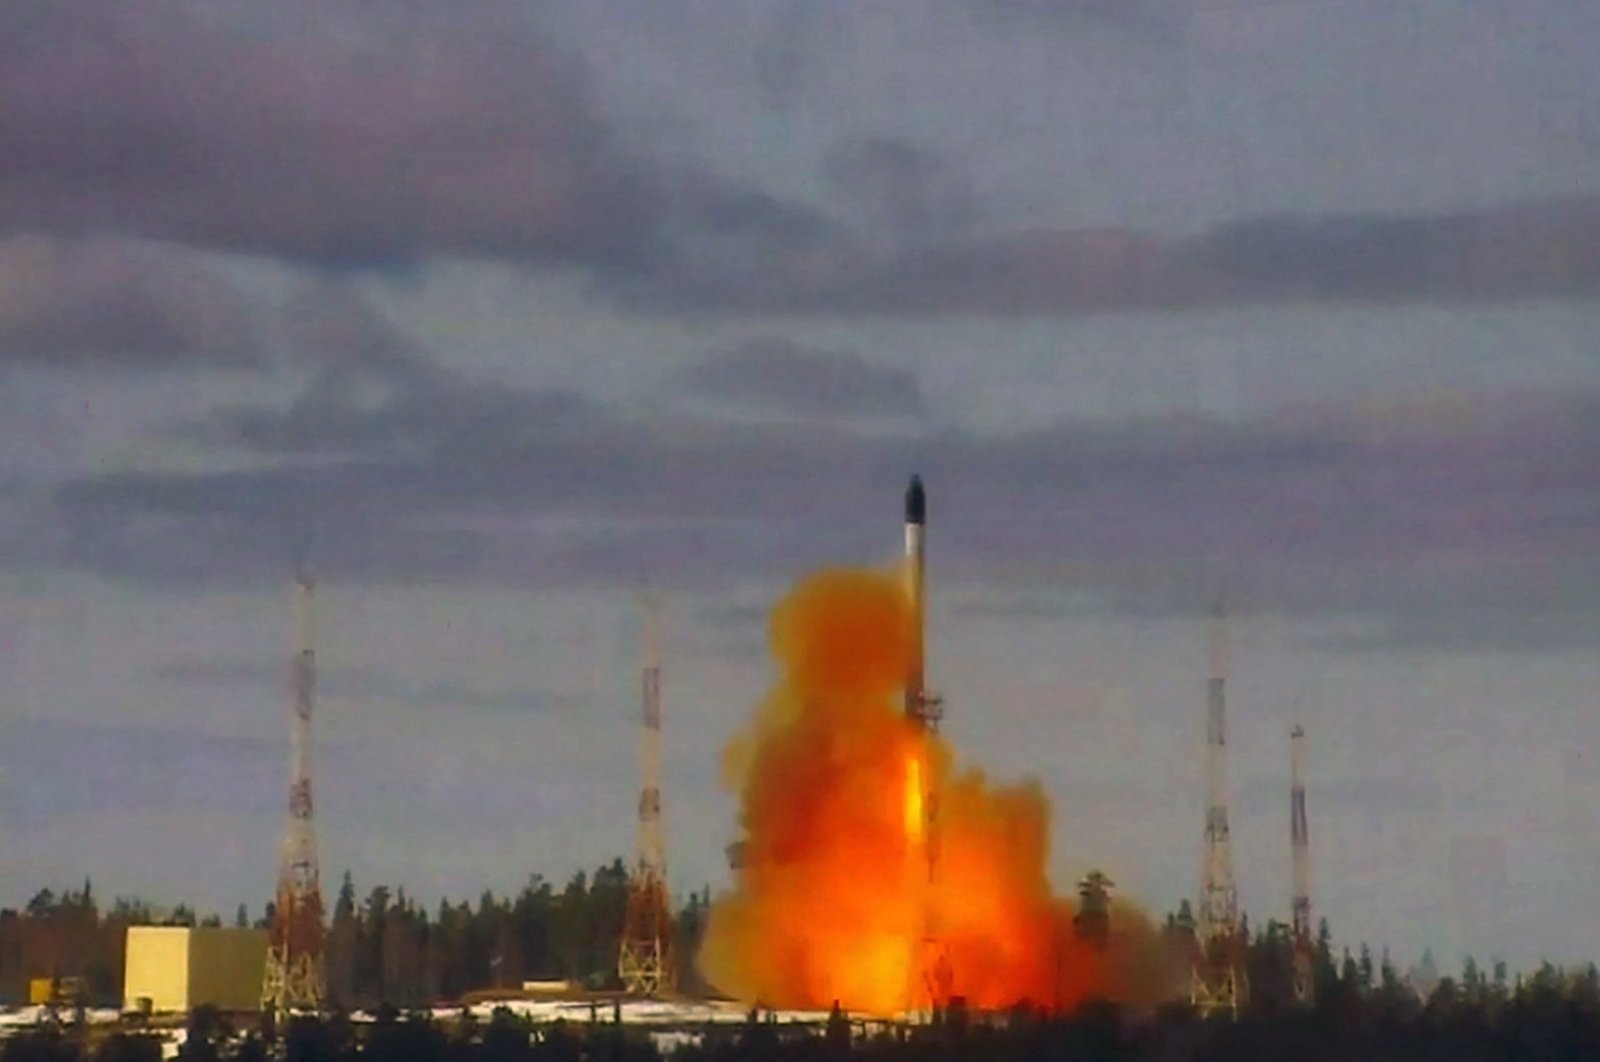 This grab from video footage released by the Russian Defense Ministry shows the launching of the Sarmat intercontinental ballistic missile at Plesetsk testing field, Russia, April 20, 2022. (Photo by Russian Defense Ministry via AFP)